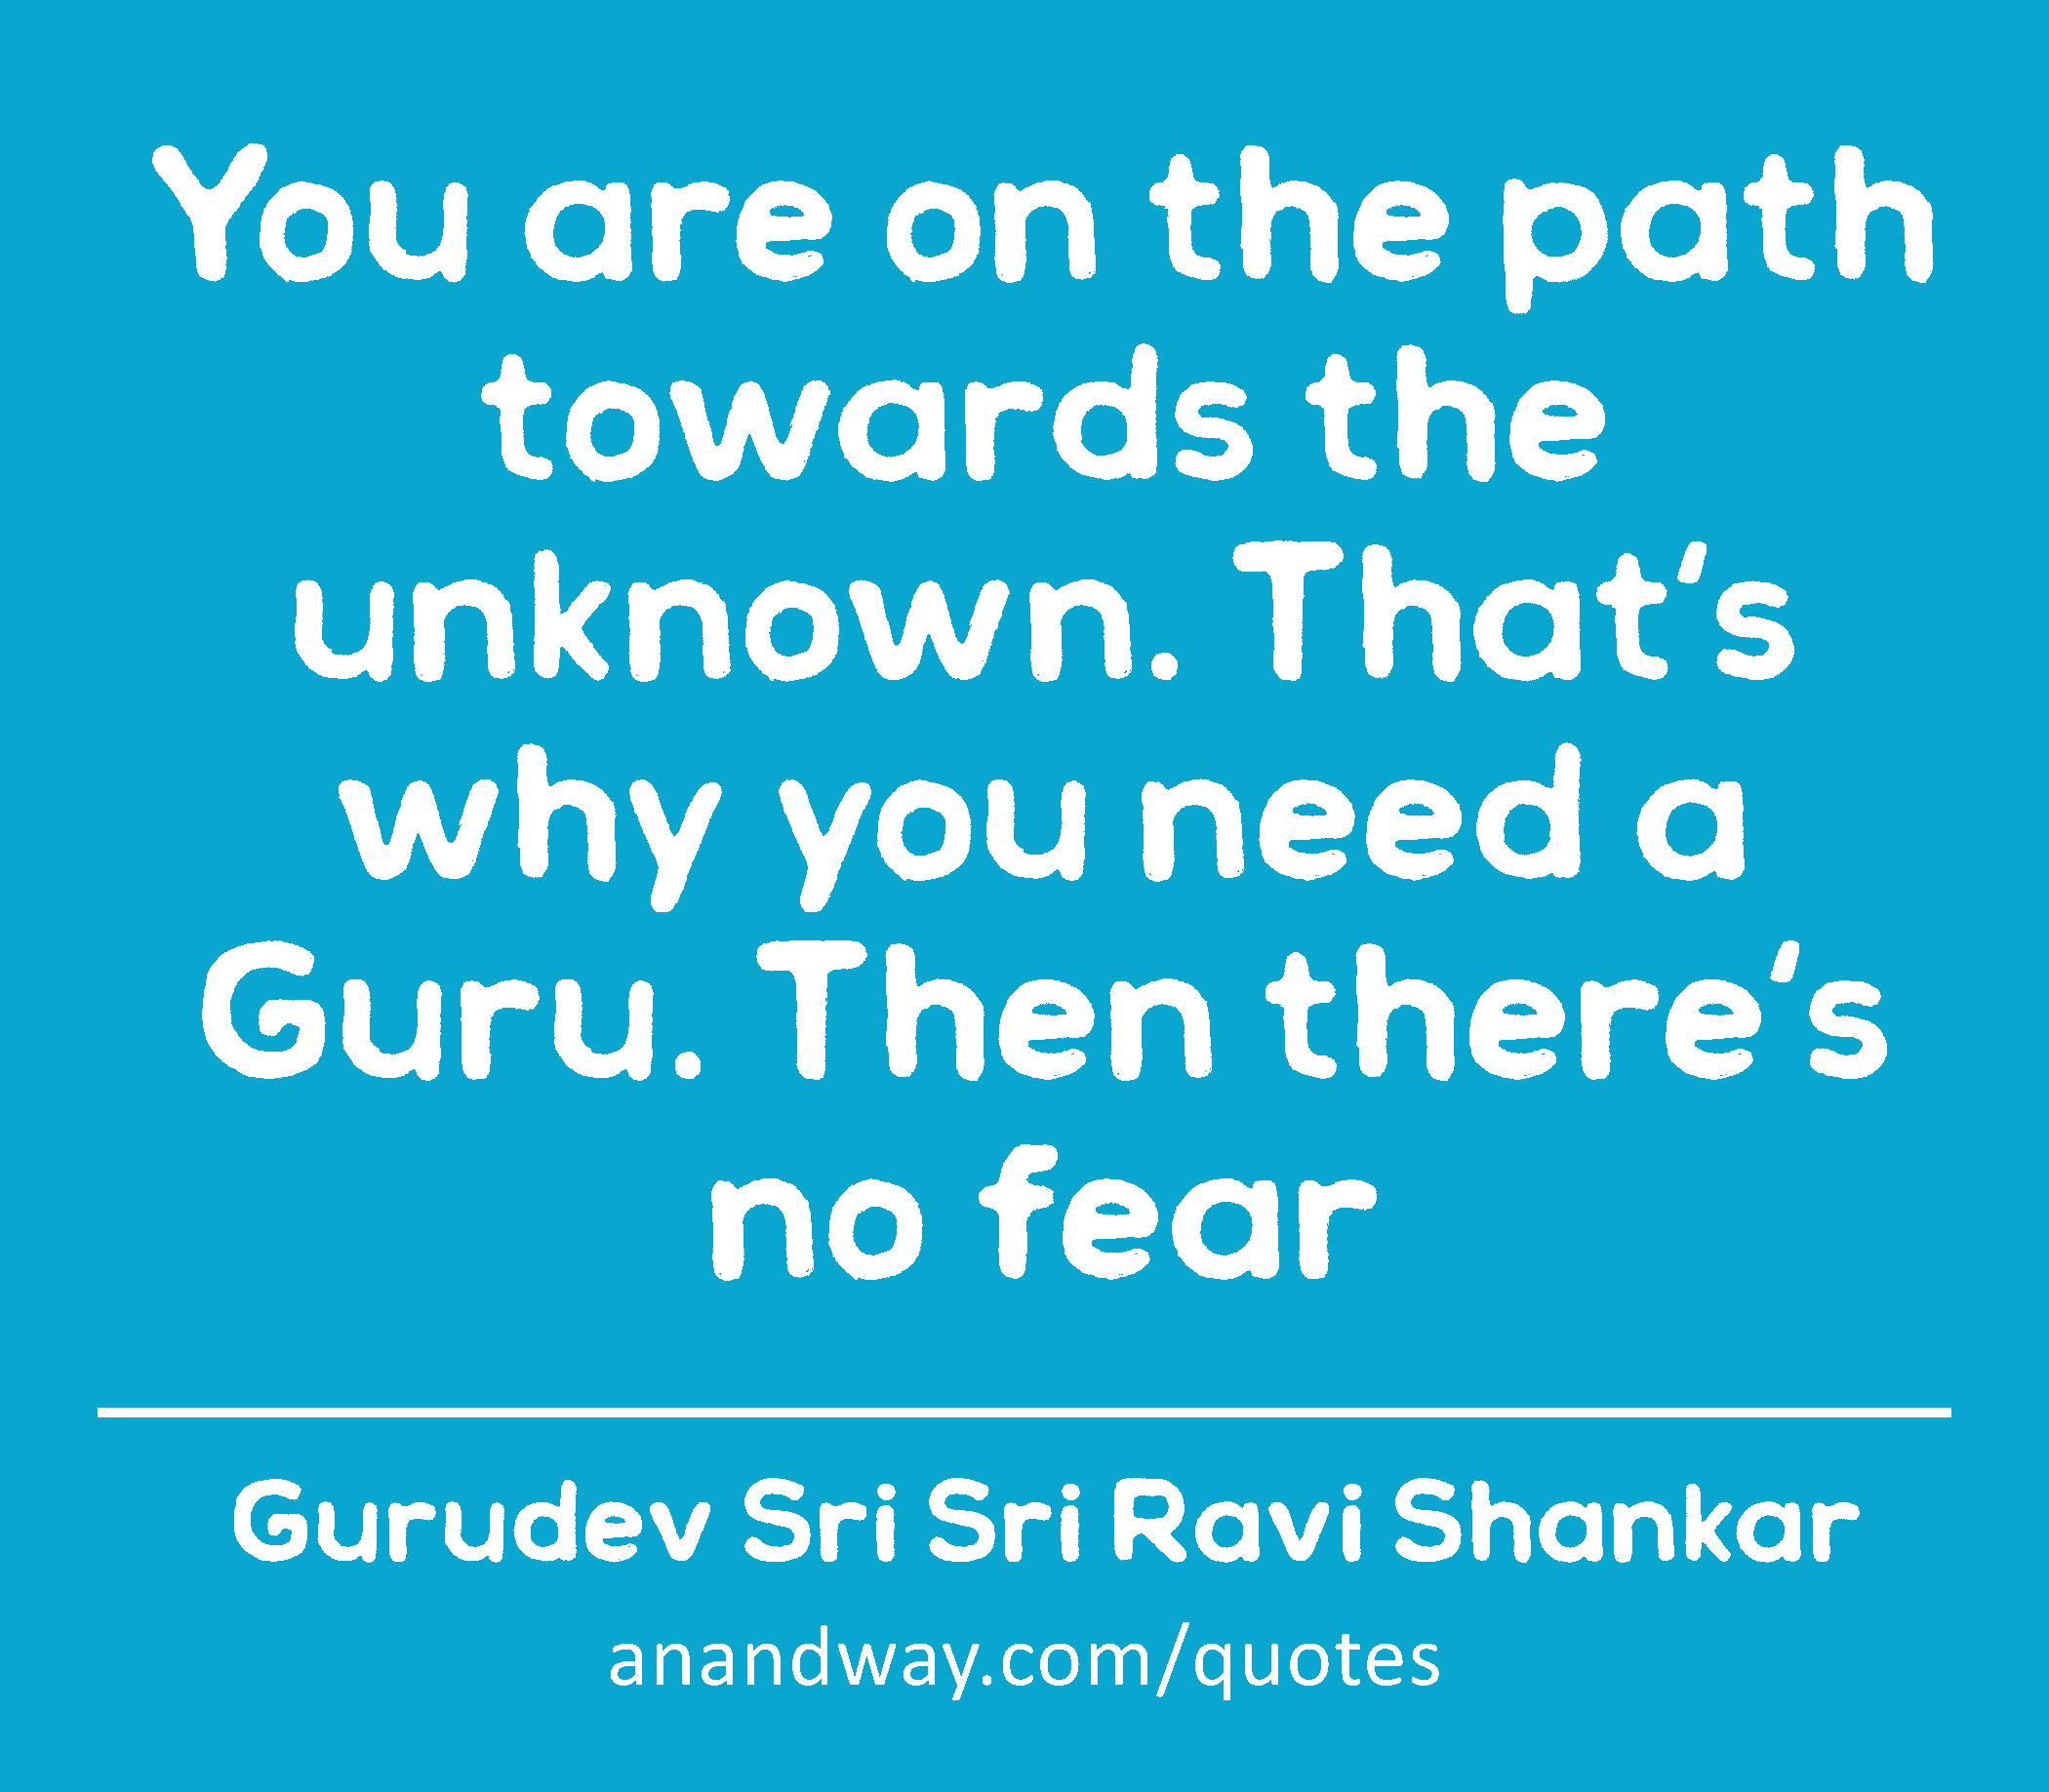 You are on the path towards the unknown. That's why you need a Guru. Then there's no fear 
 -Gurudev Sri Sri Ravi Shankar